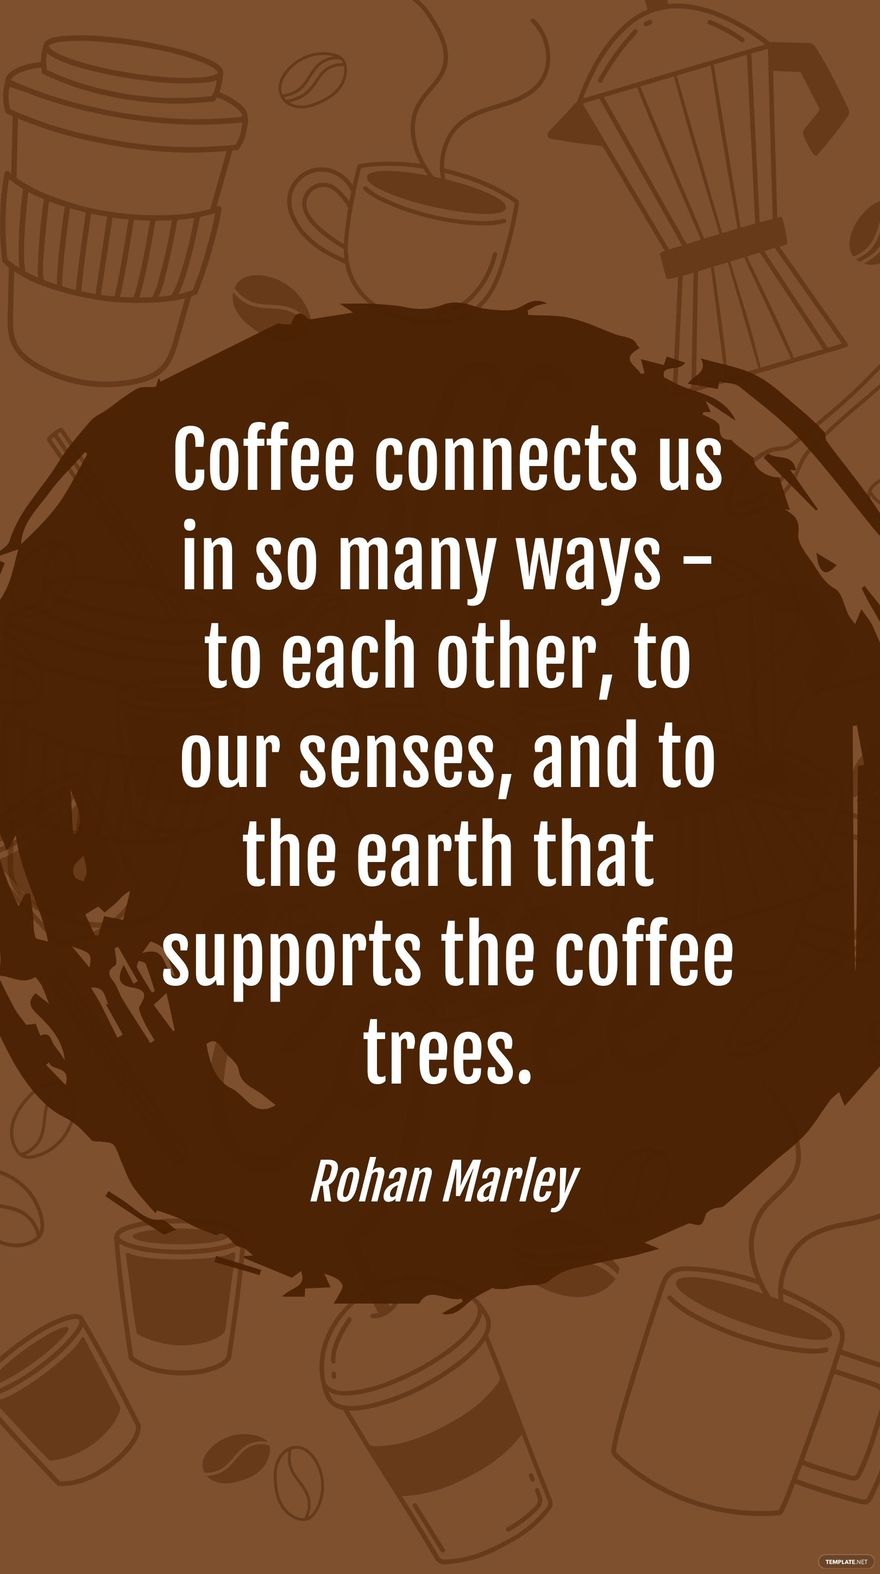 Rohan Marley - Coffee connects us in so many ways - to each other, to our senses, and to the earth that supports the coffee trees.